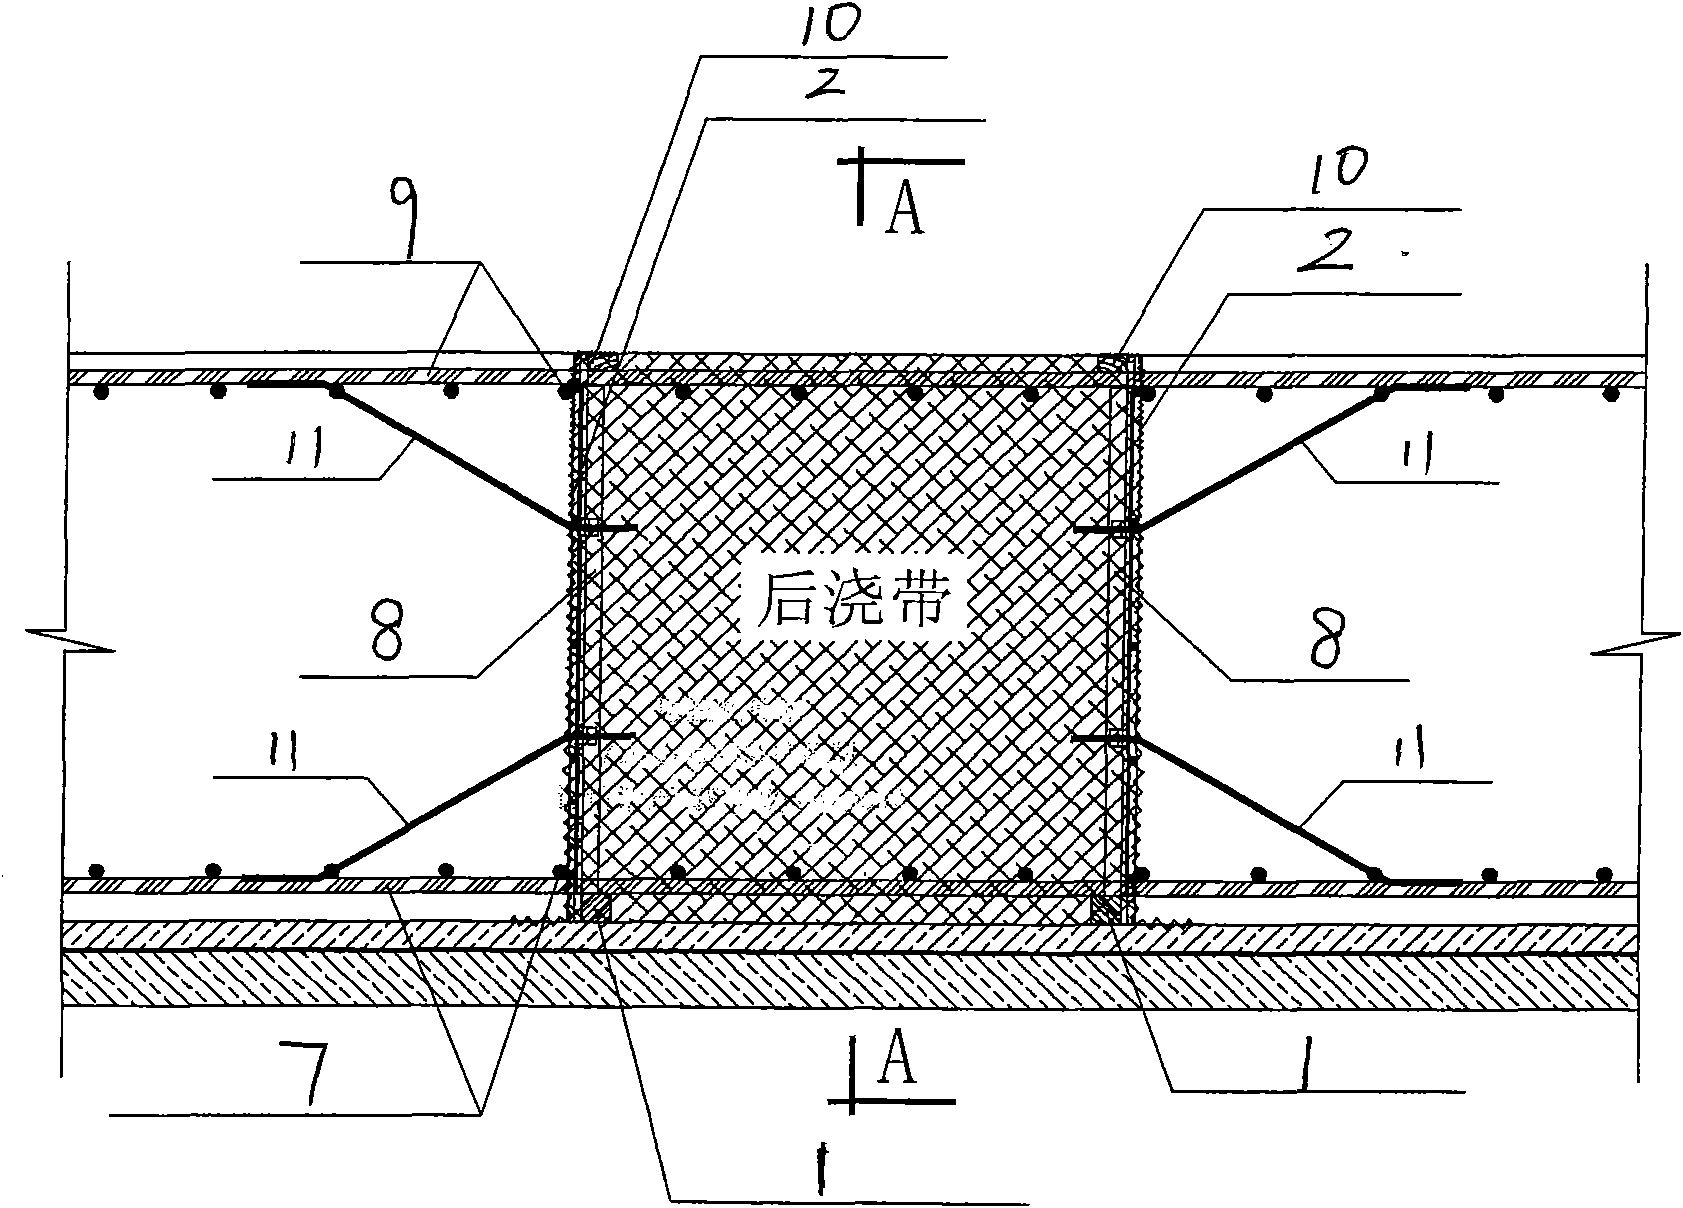 Construction method of sole plate post-poured strip form bracing system